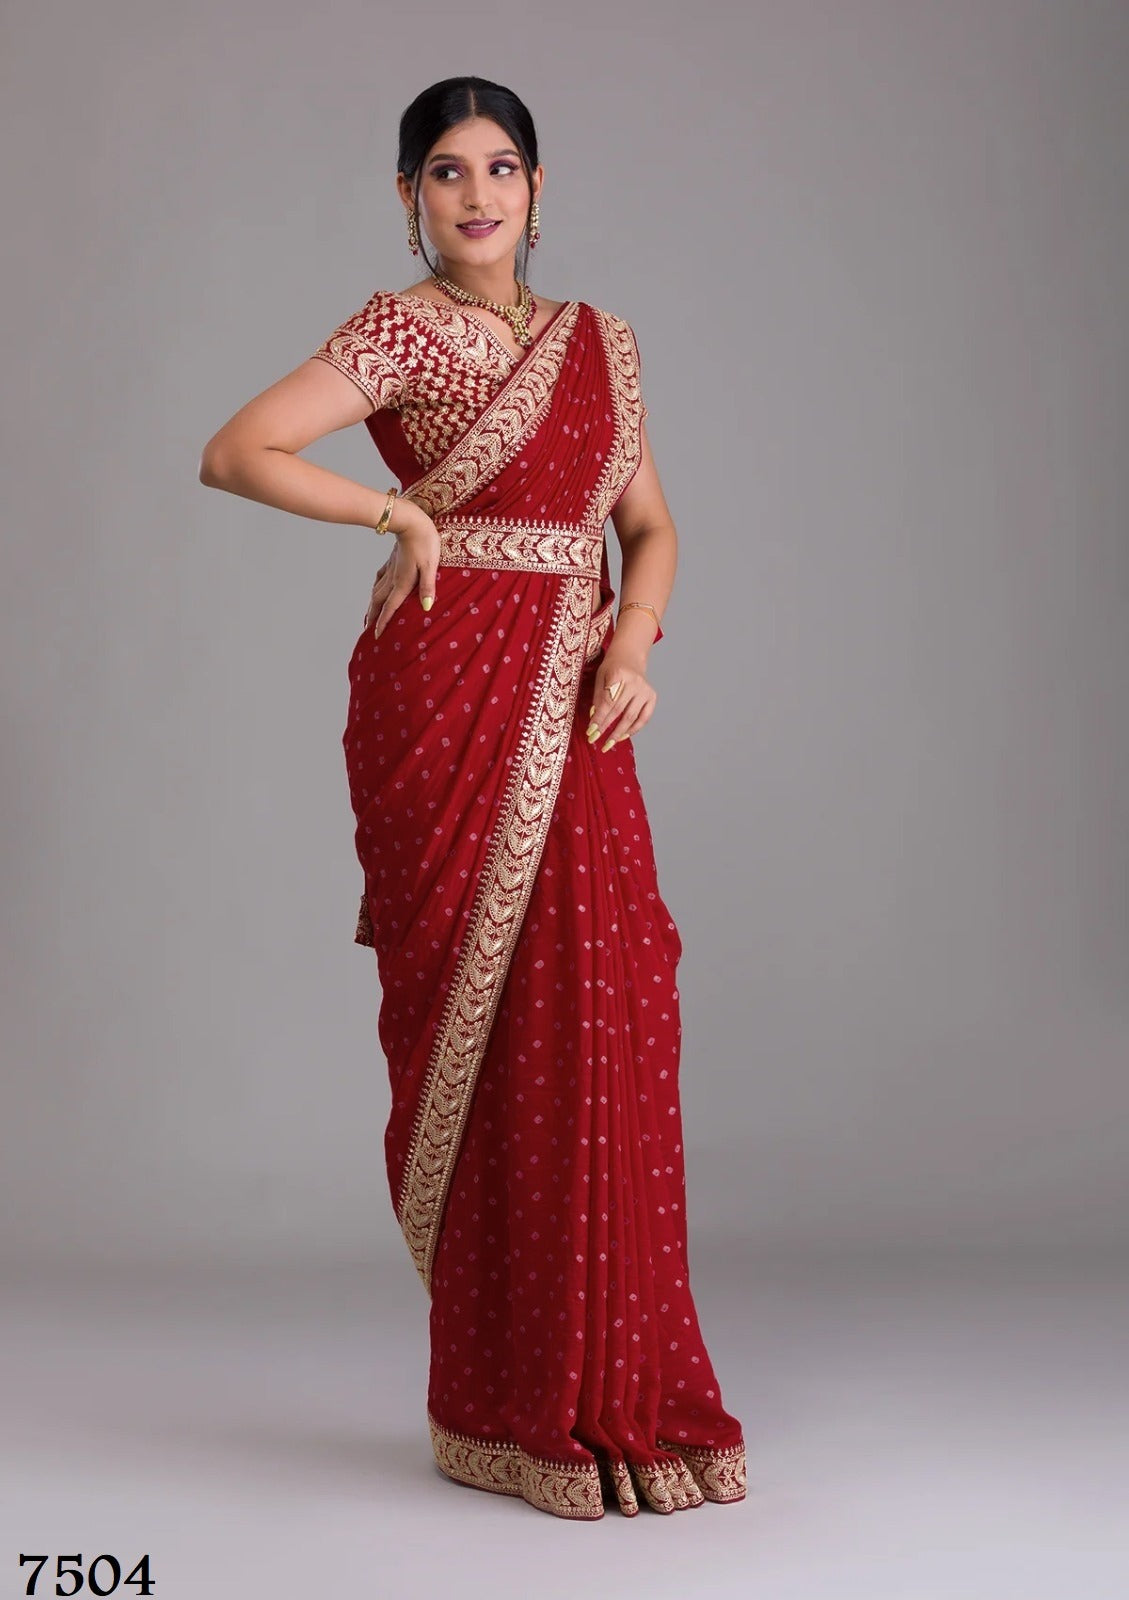 Chiffon Red Party Wear Designer Saree at Rs 3500 in Delhi | ID: 4275460955